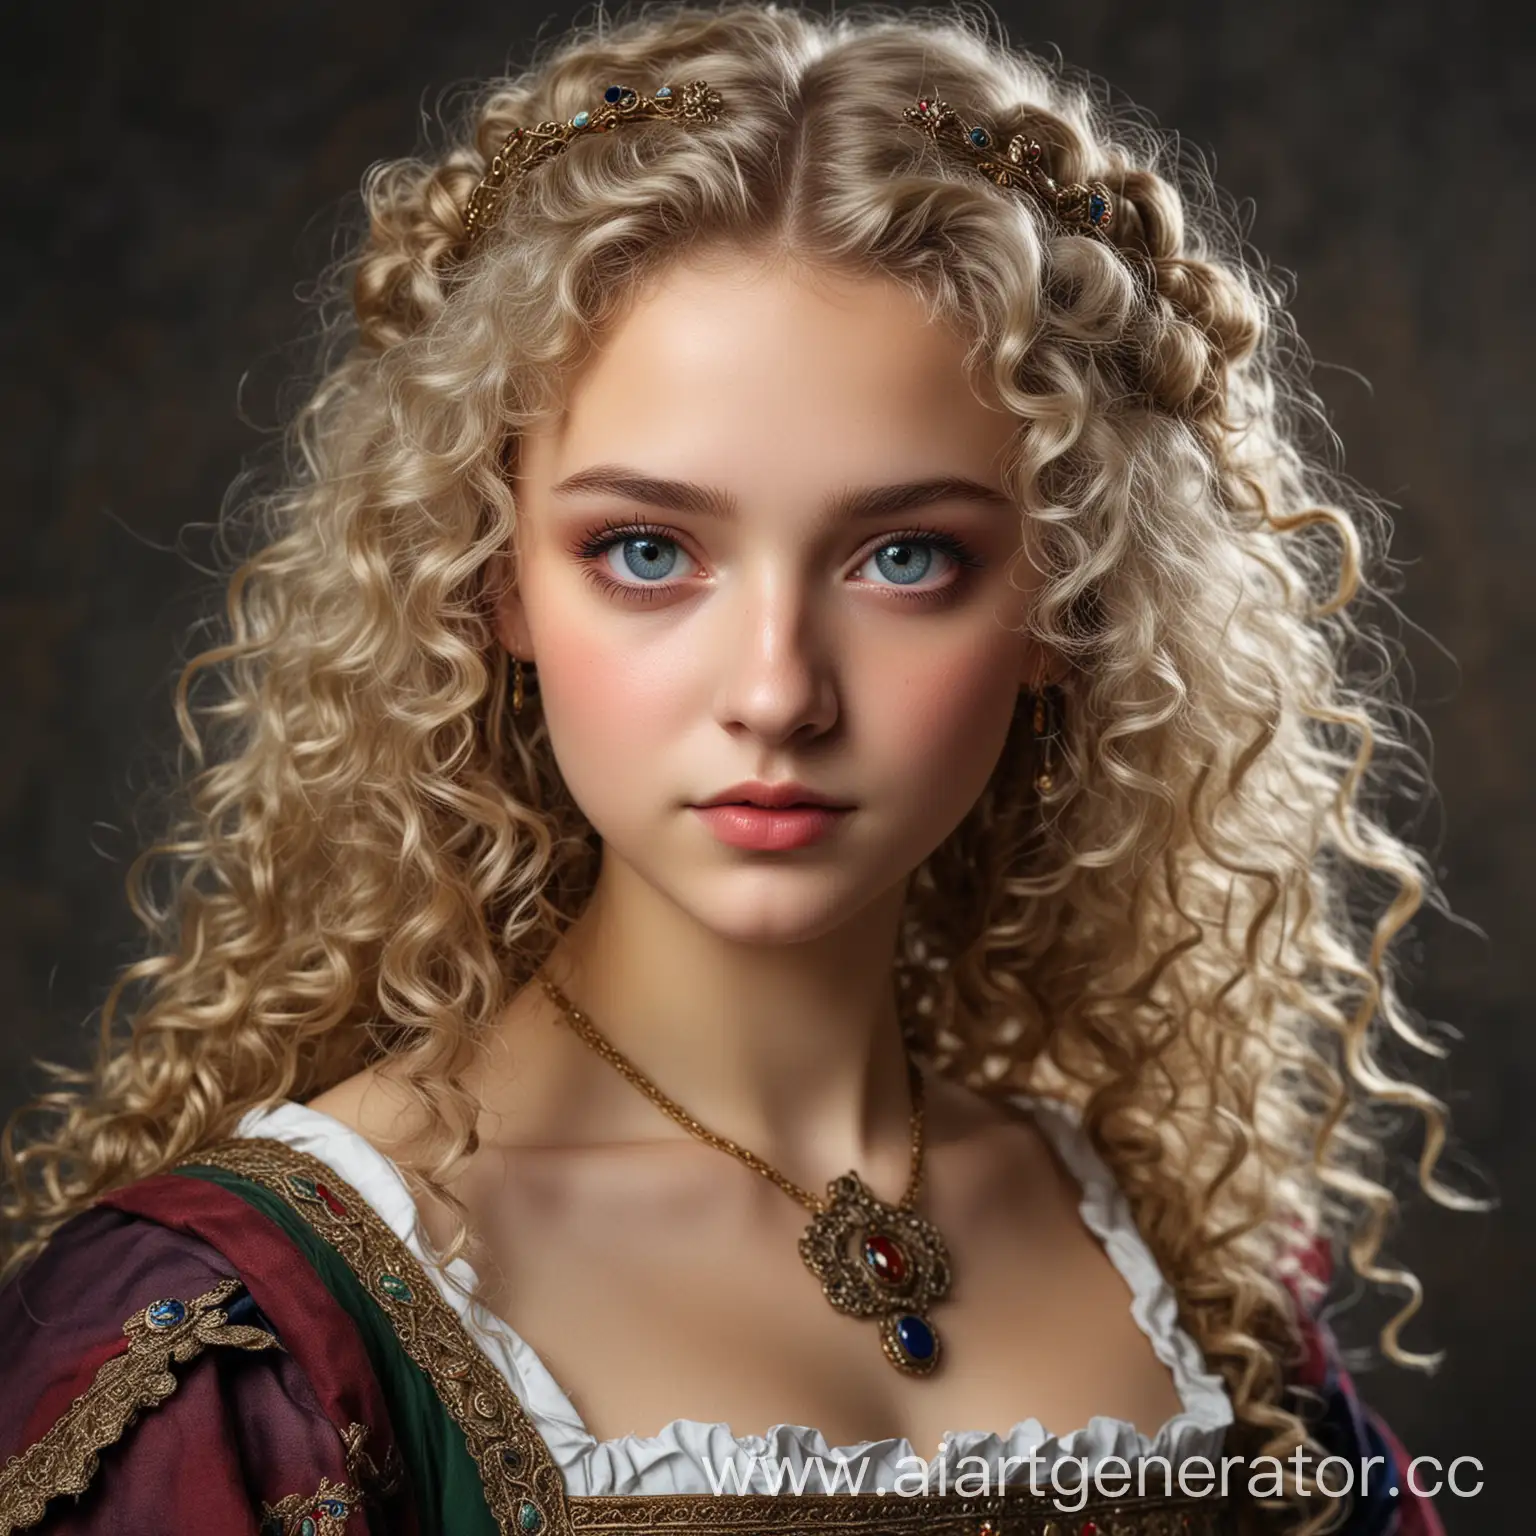 girl of aristocratic type, light curly hair, she has multicolored eyes, in medieval clothing